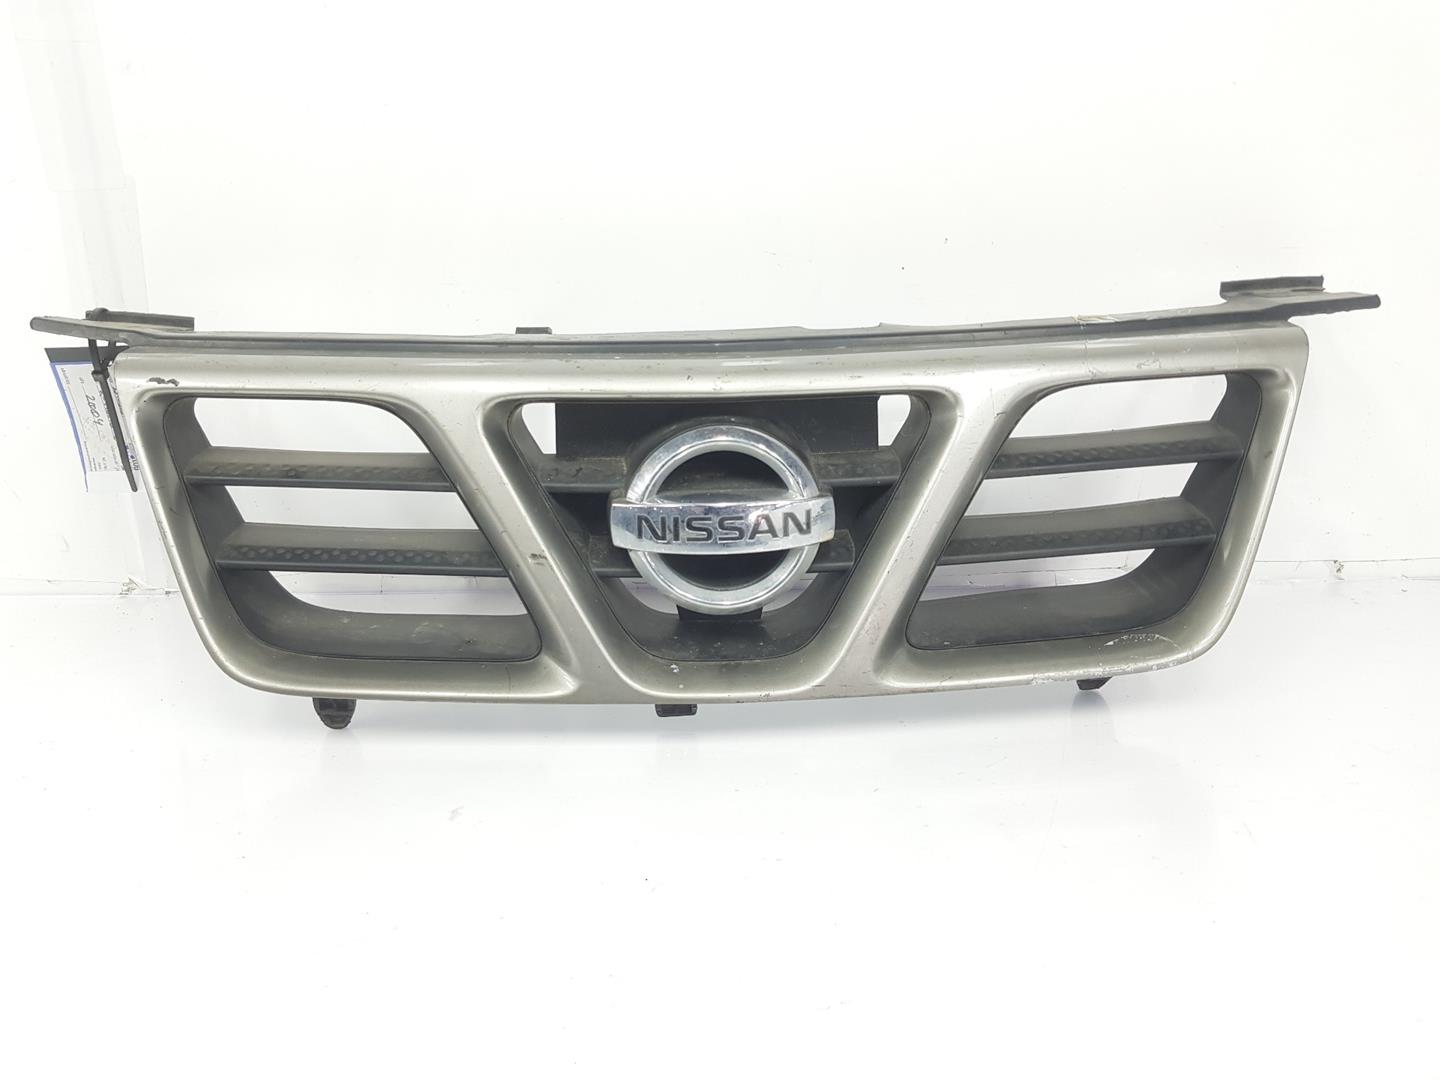 NISSAN X-Trail T30 (2001-2007) Radiator Grille 623108H70A, 623108H700 19804884